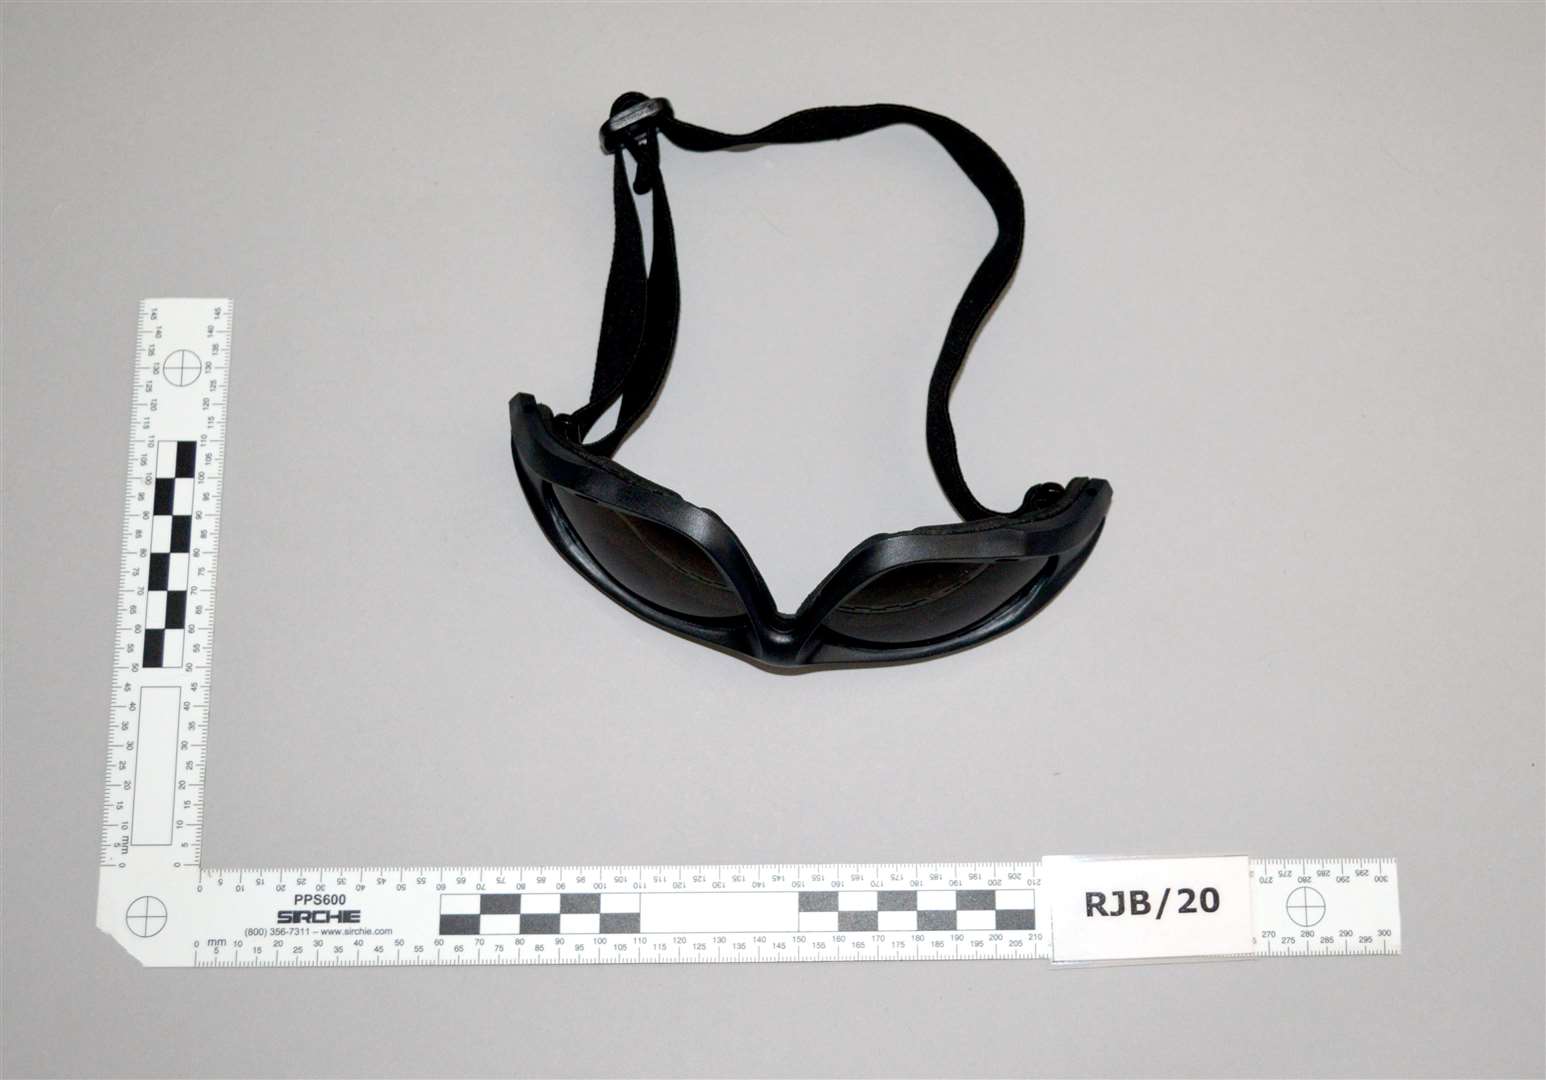 Goggles purchased by King as one of his items of ‘special ops’ clothing (Metropolitan Police/PA)